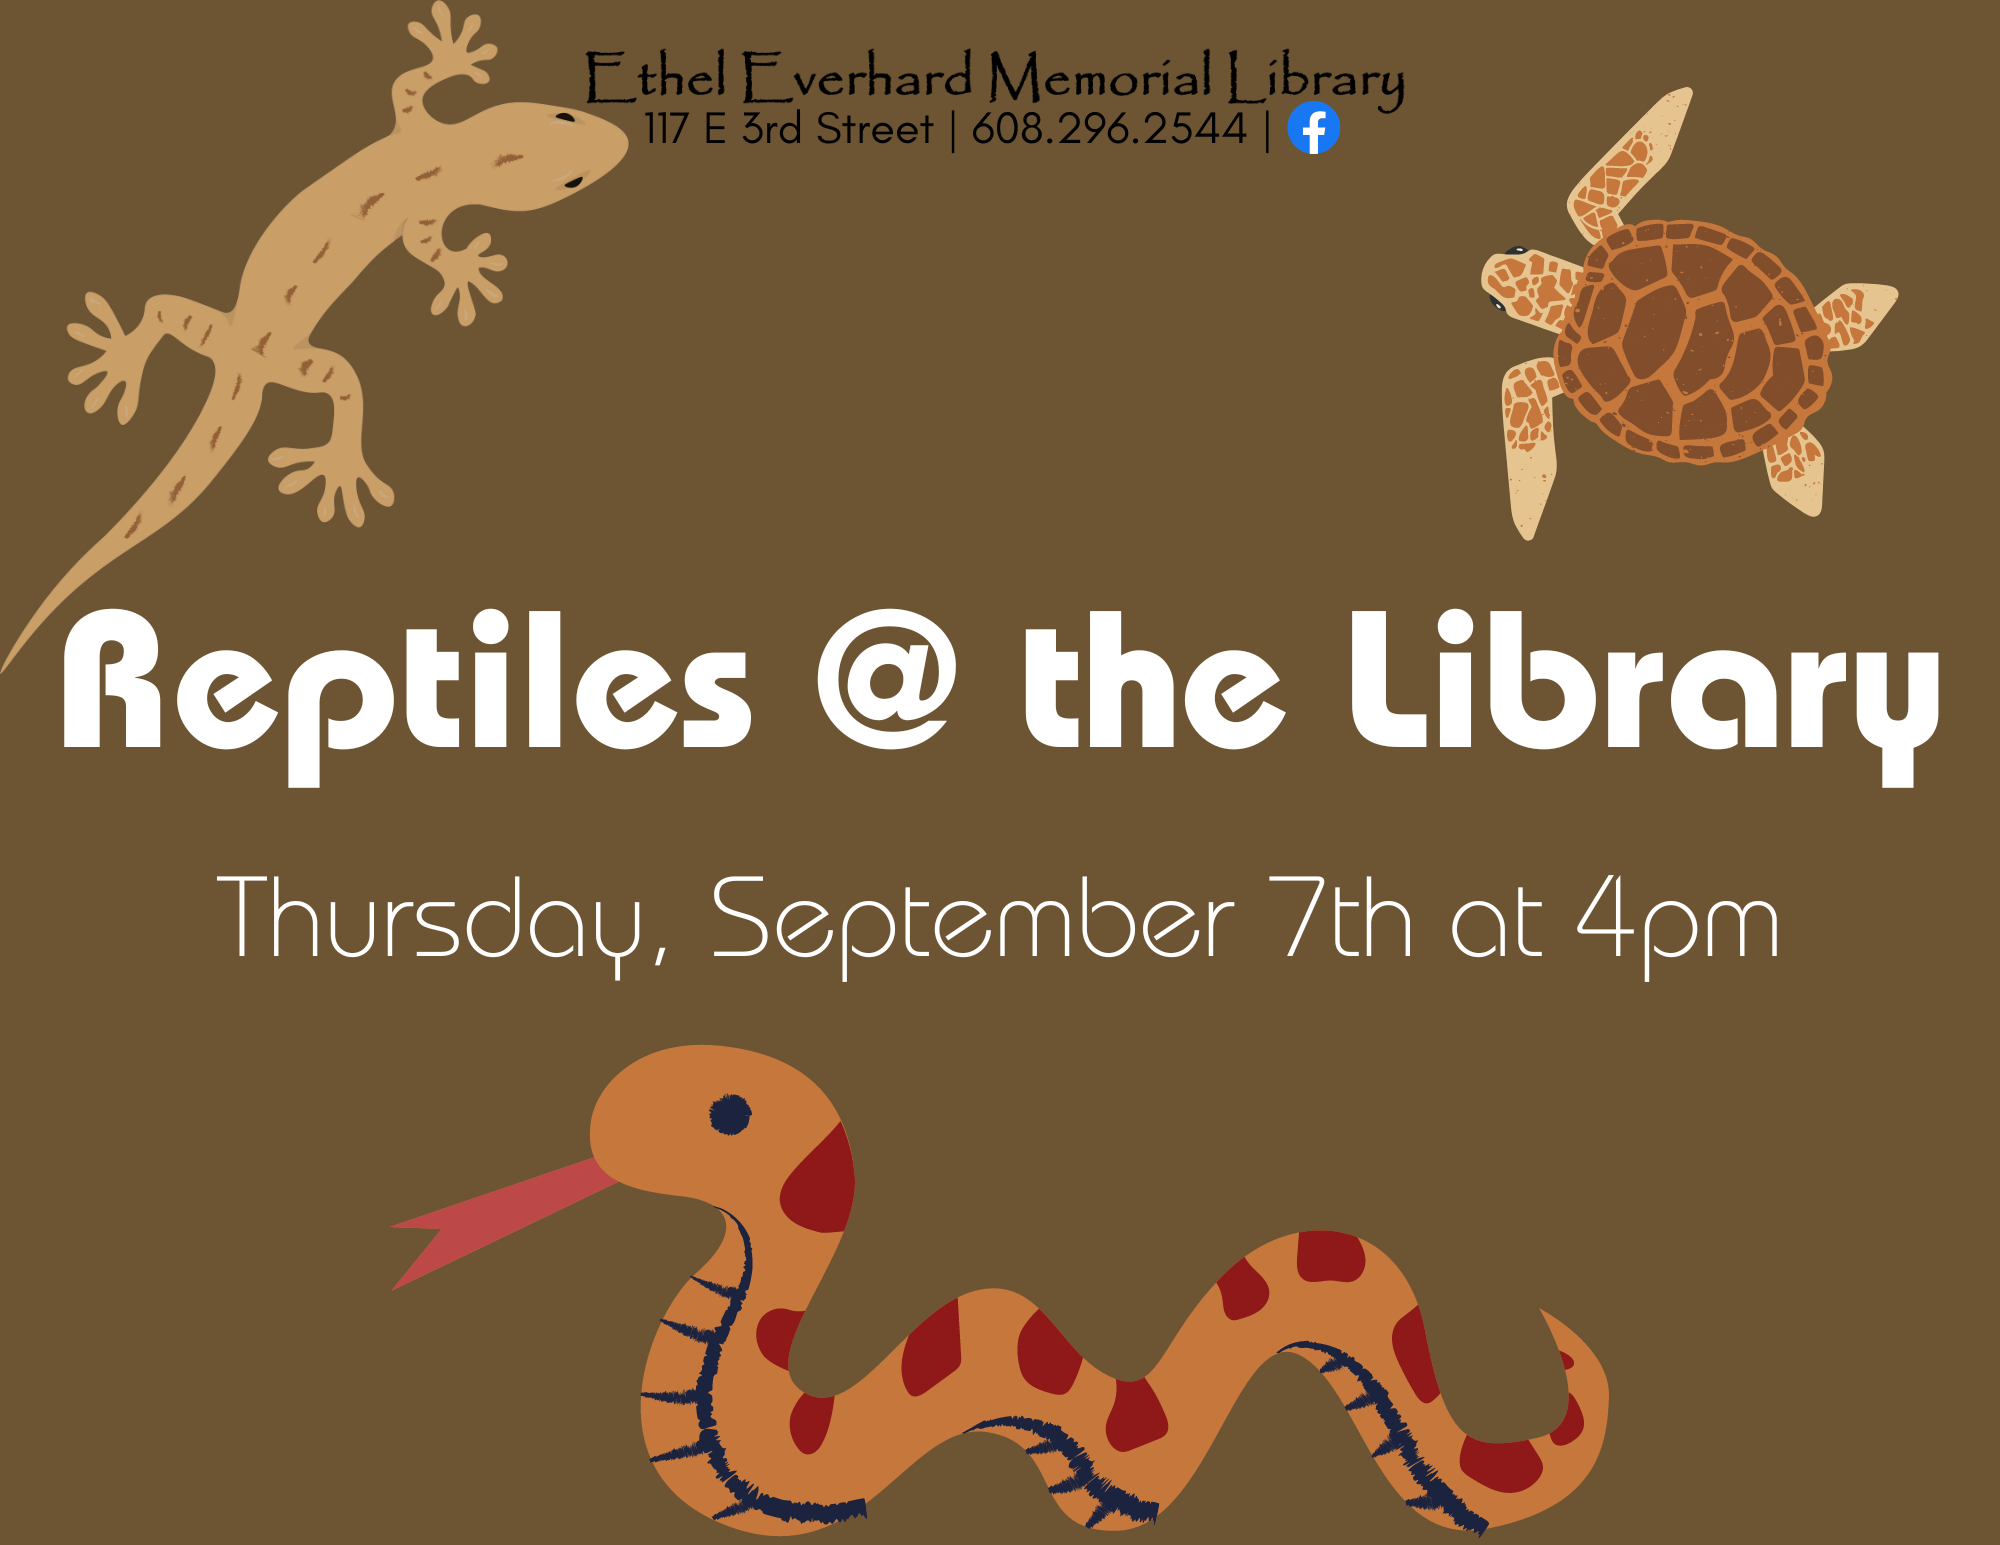 Reptiles @ the Library